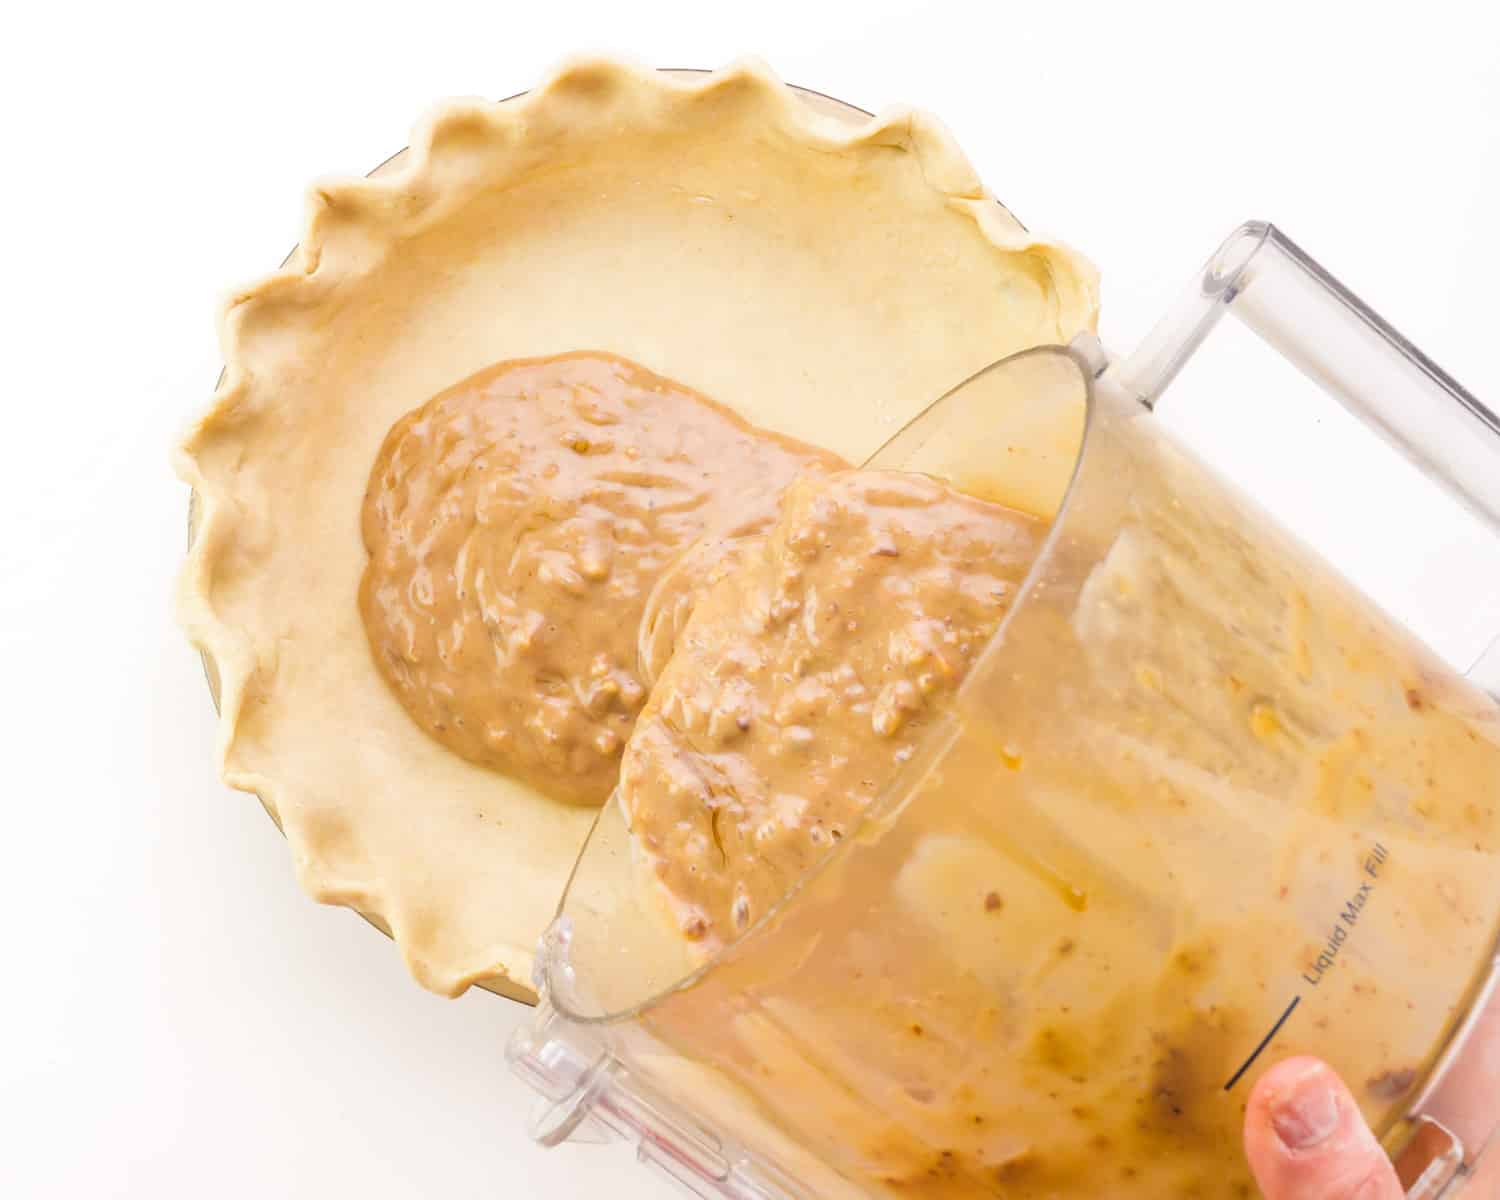 Pecan pie filling is being poured into a prepared pie crust.